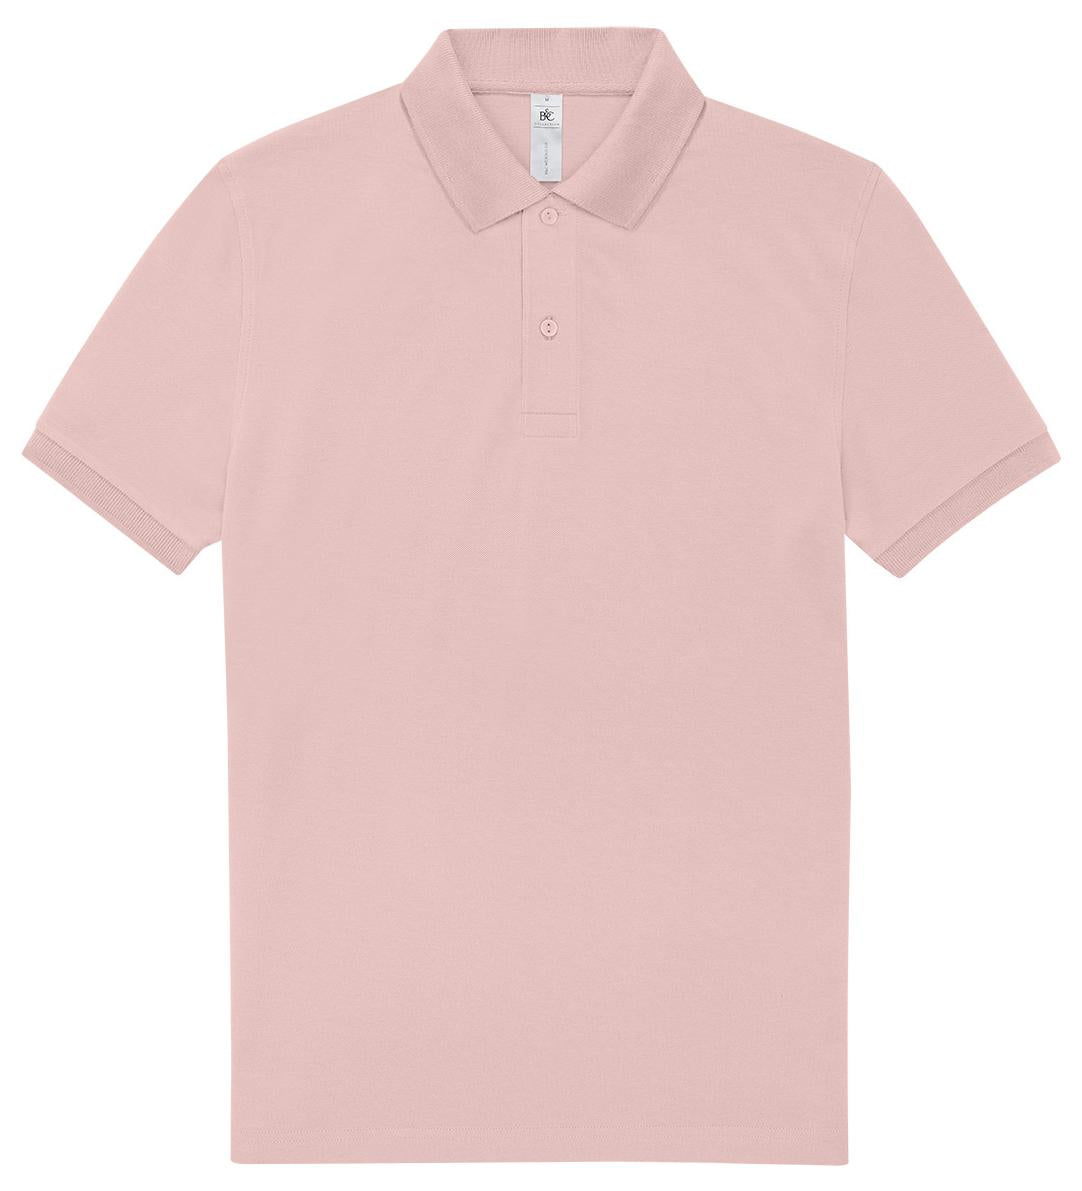 B&C Collection My Polo 210 - Blush Pink